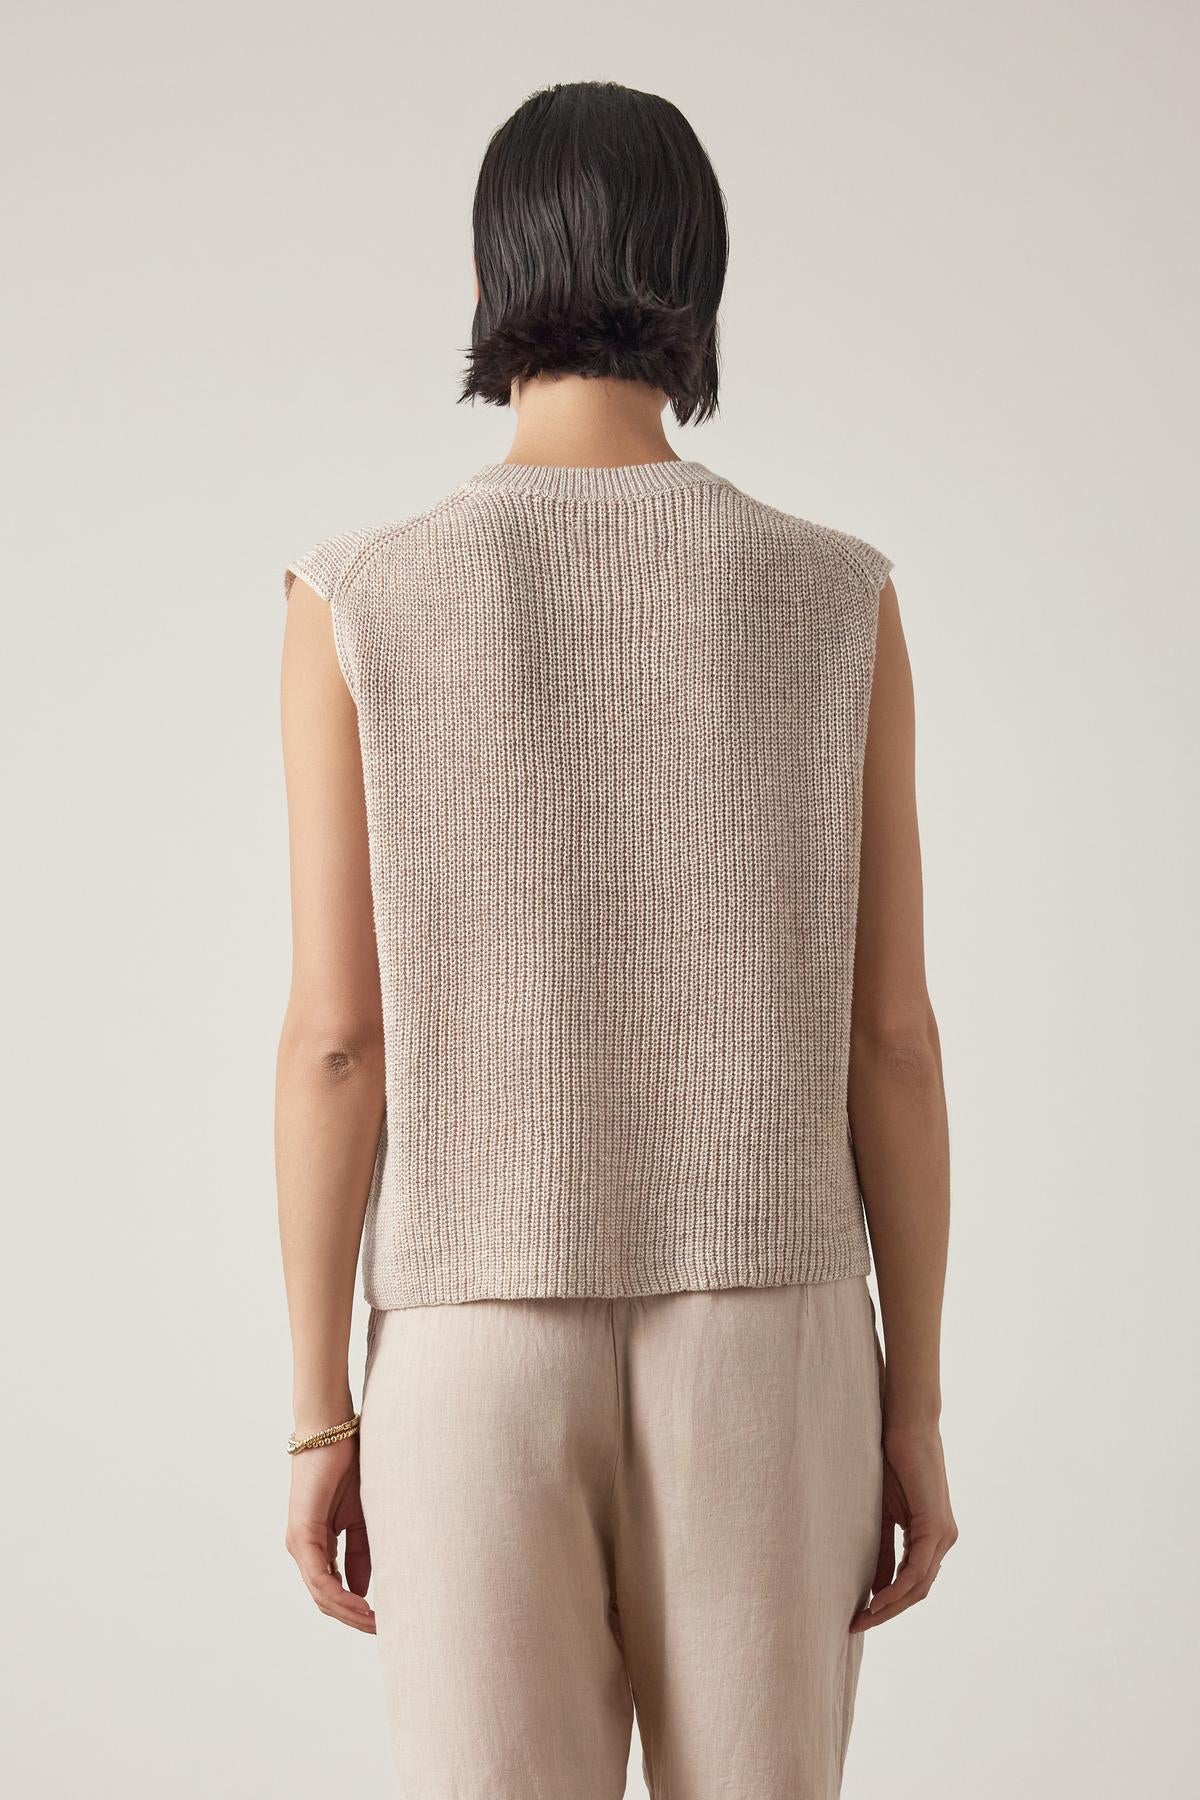   Rear view of a woman wearing a beige GARDENA LINEN SWEATER VEST sleeveless knit top and light linen fabric trousers, standing against a plain background by Velvet by Jenny Graham. 